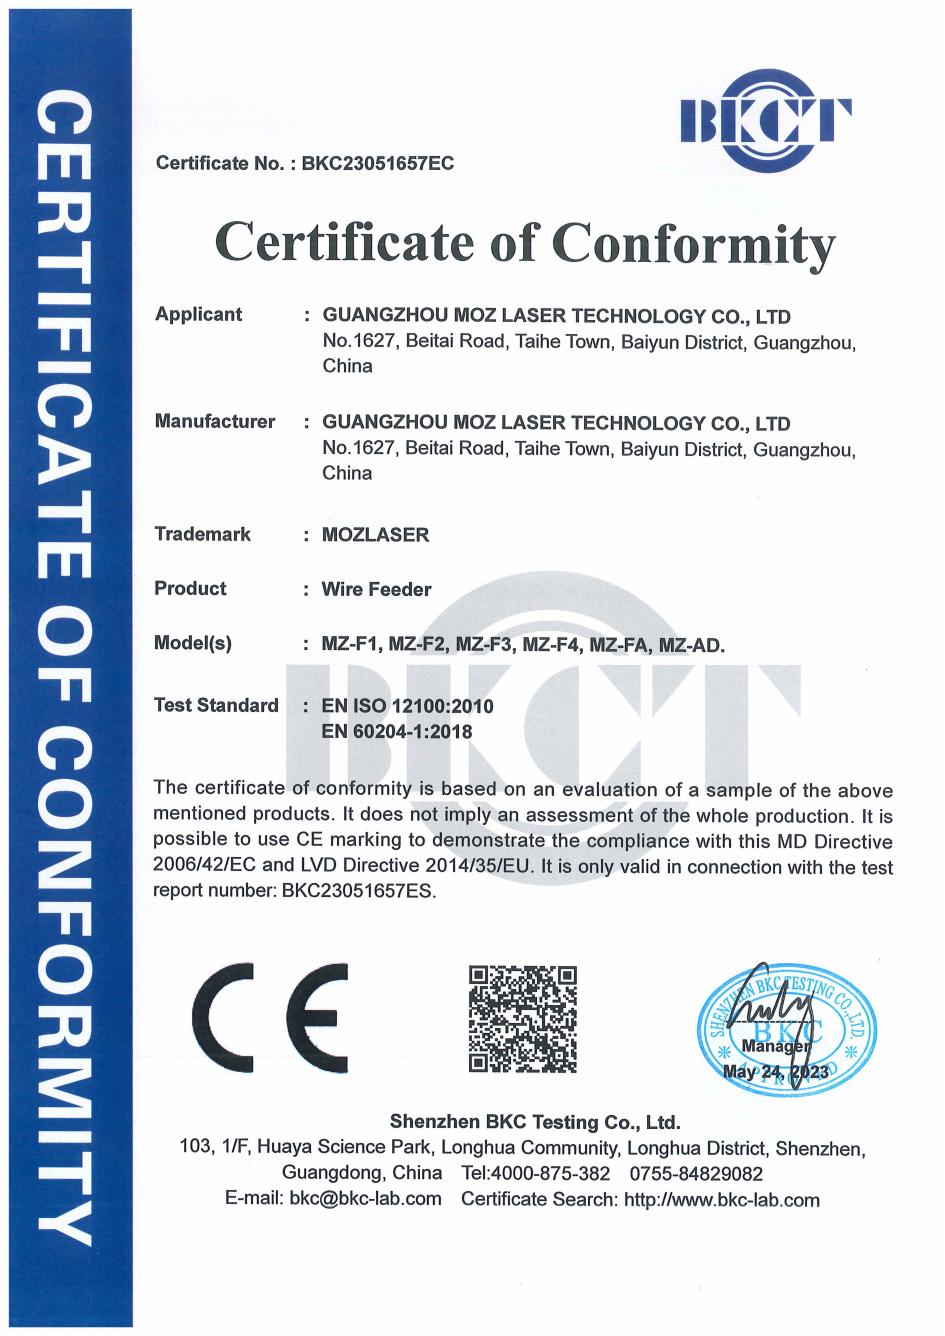 CE certificate of wire feeder of MOZLASER